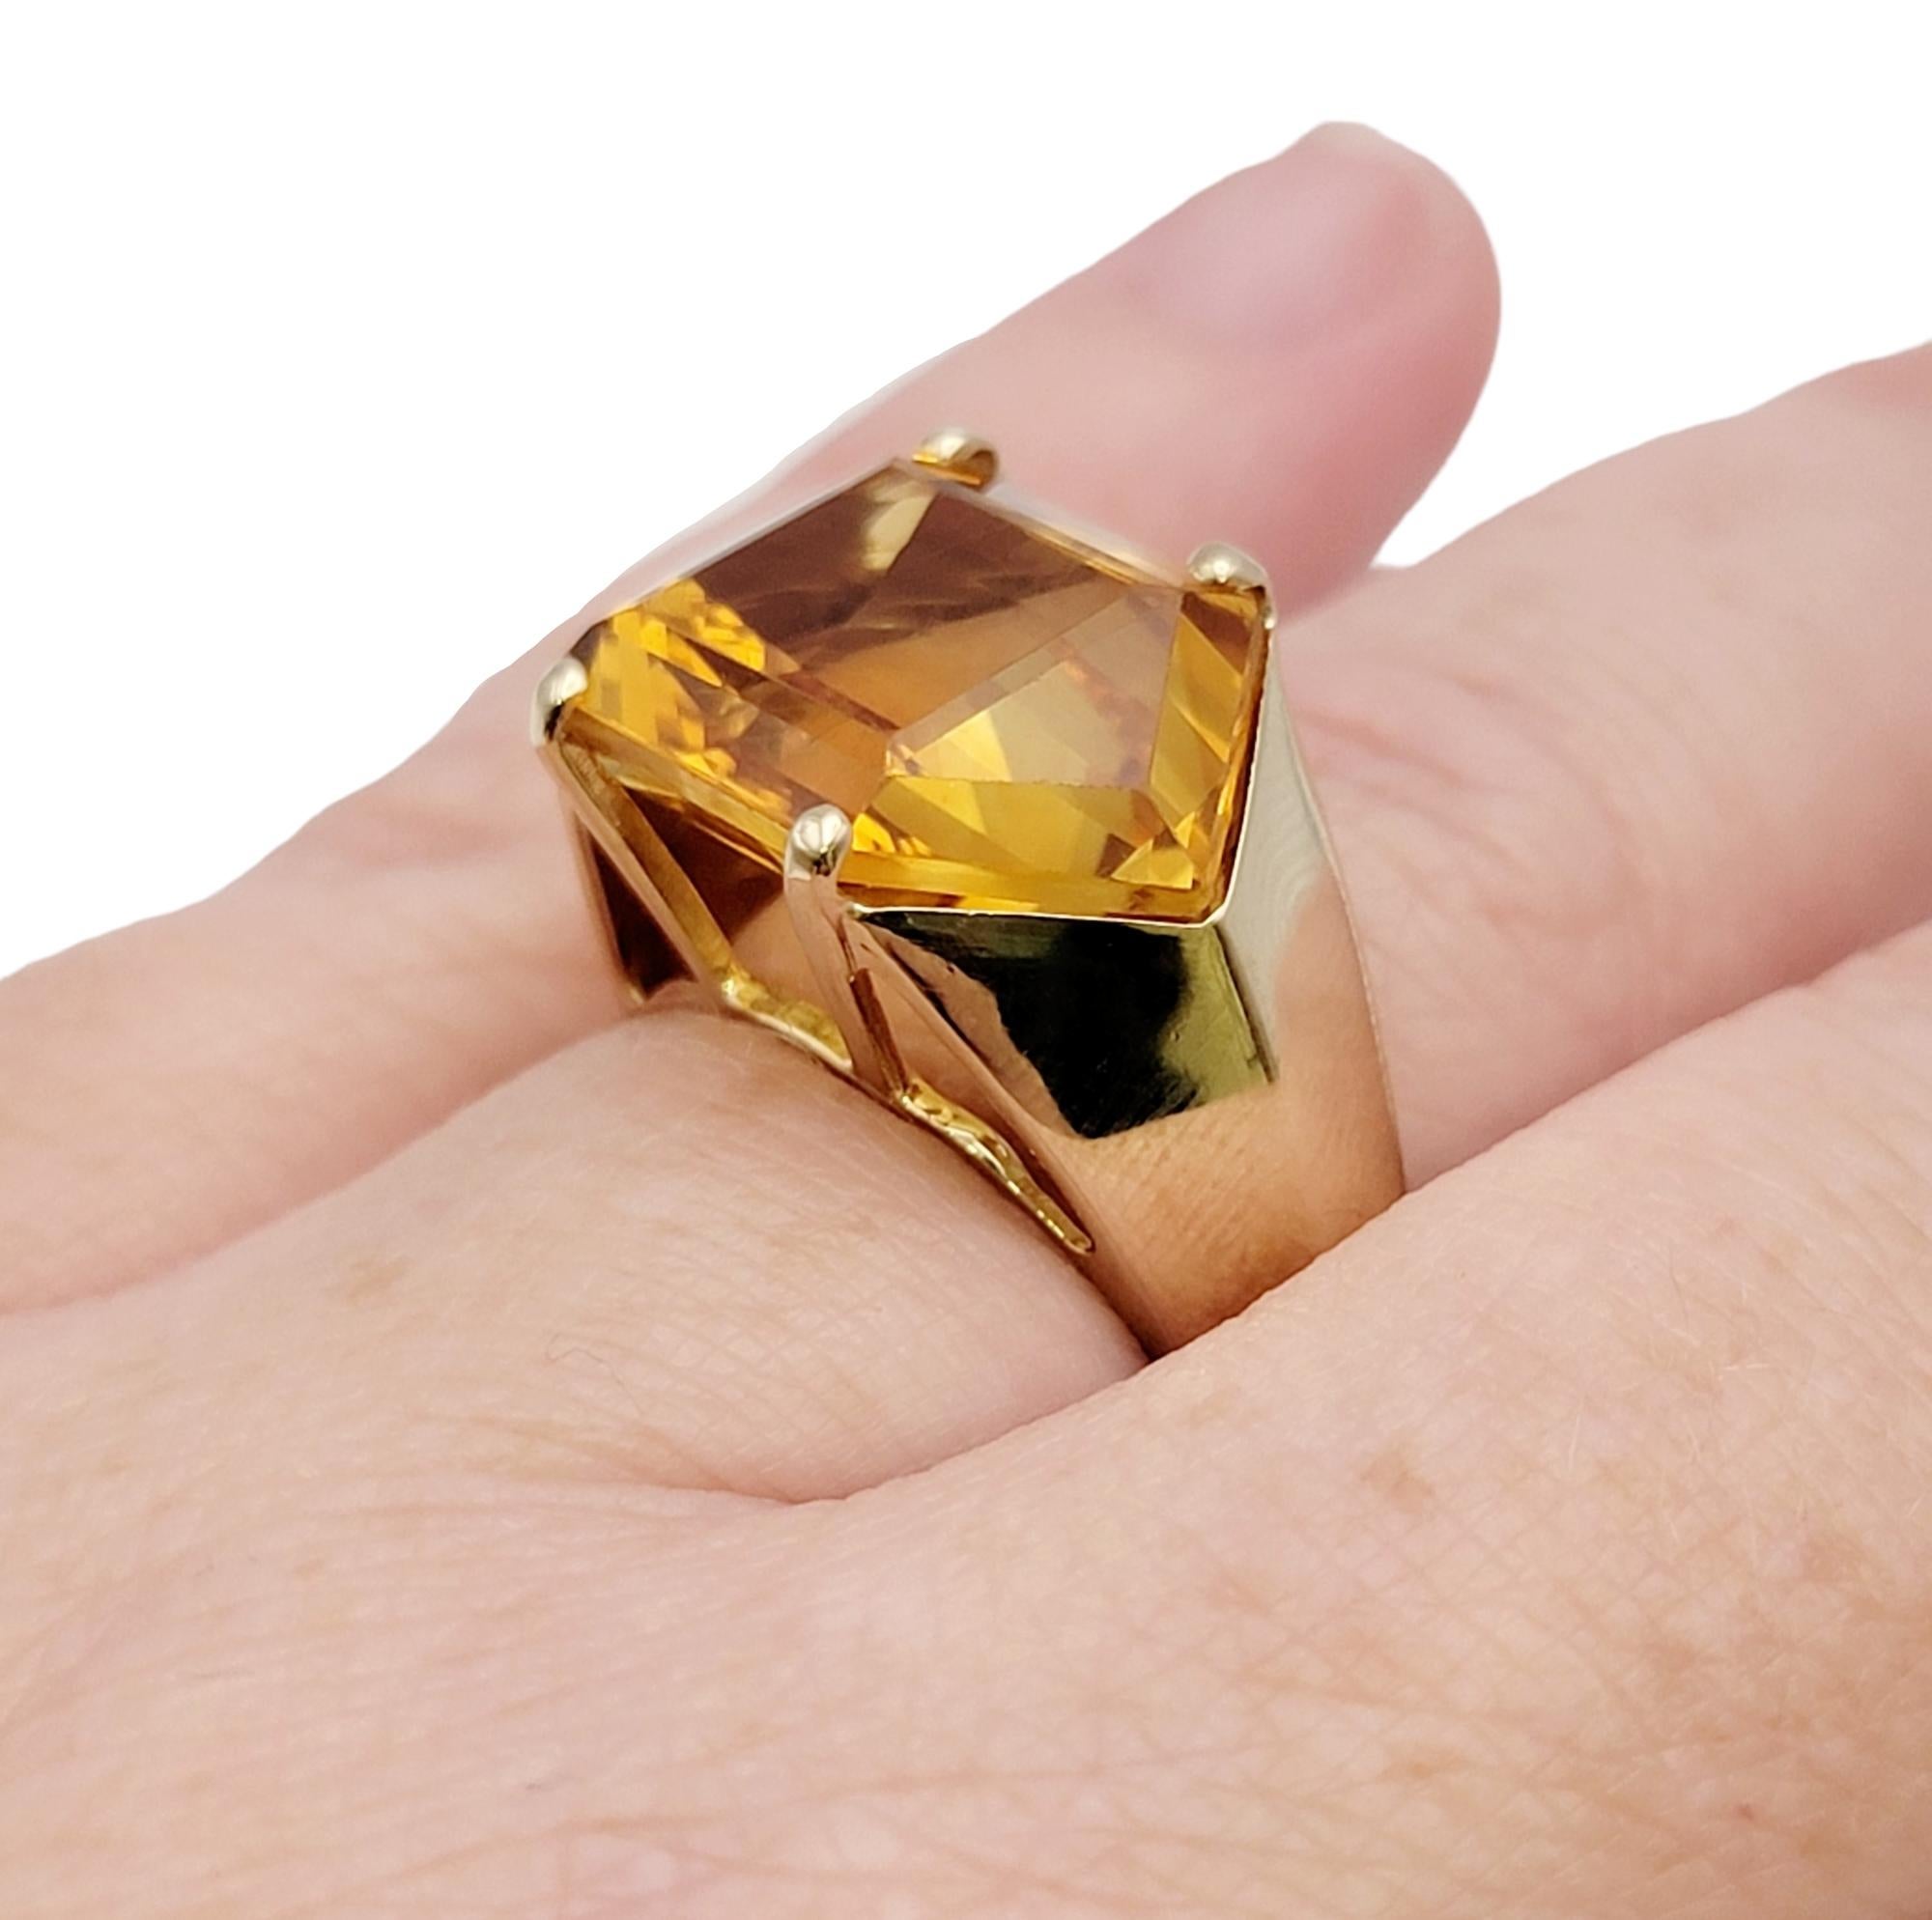 10.46 Carats Total Hexagonal Cut Citrine Cocktail Ring in 14 Karat Yellow Gold For Sale 11